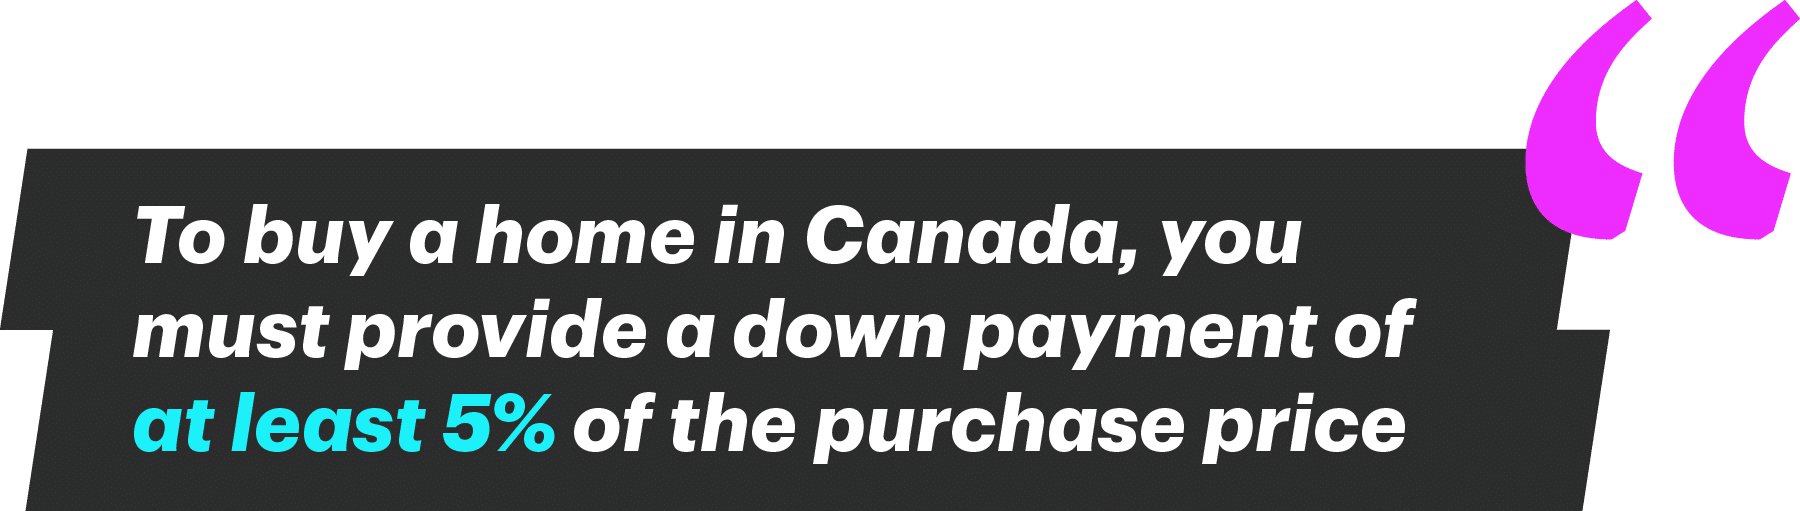 To buy a home in Canada, you must provide a down payment of at least 5% of the purchase price